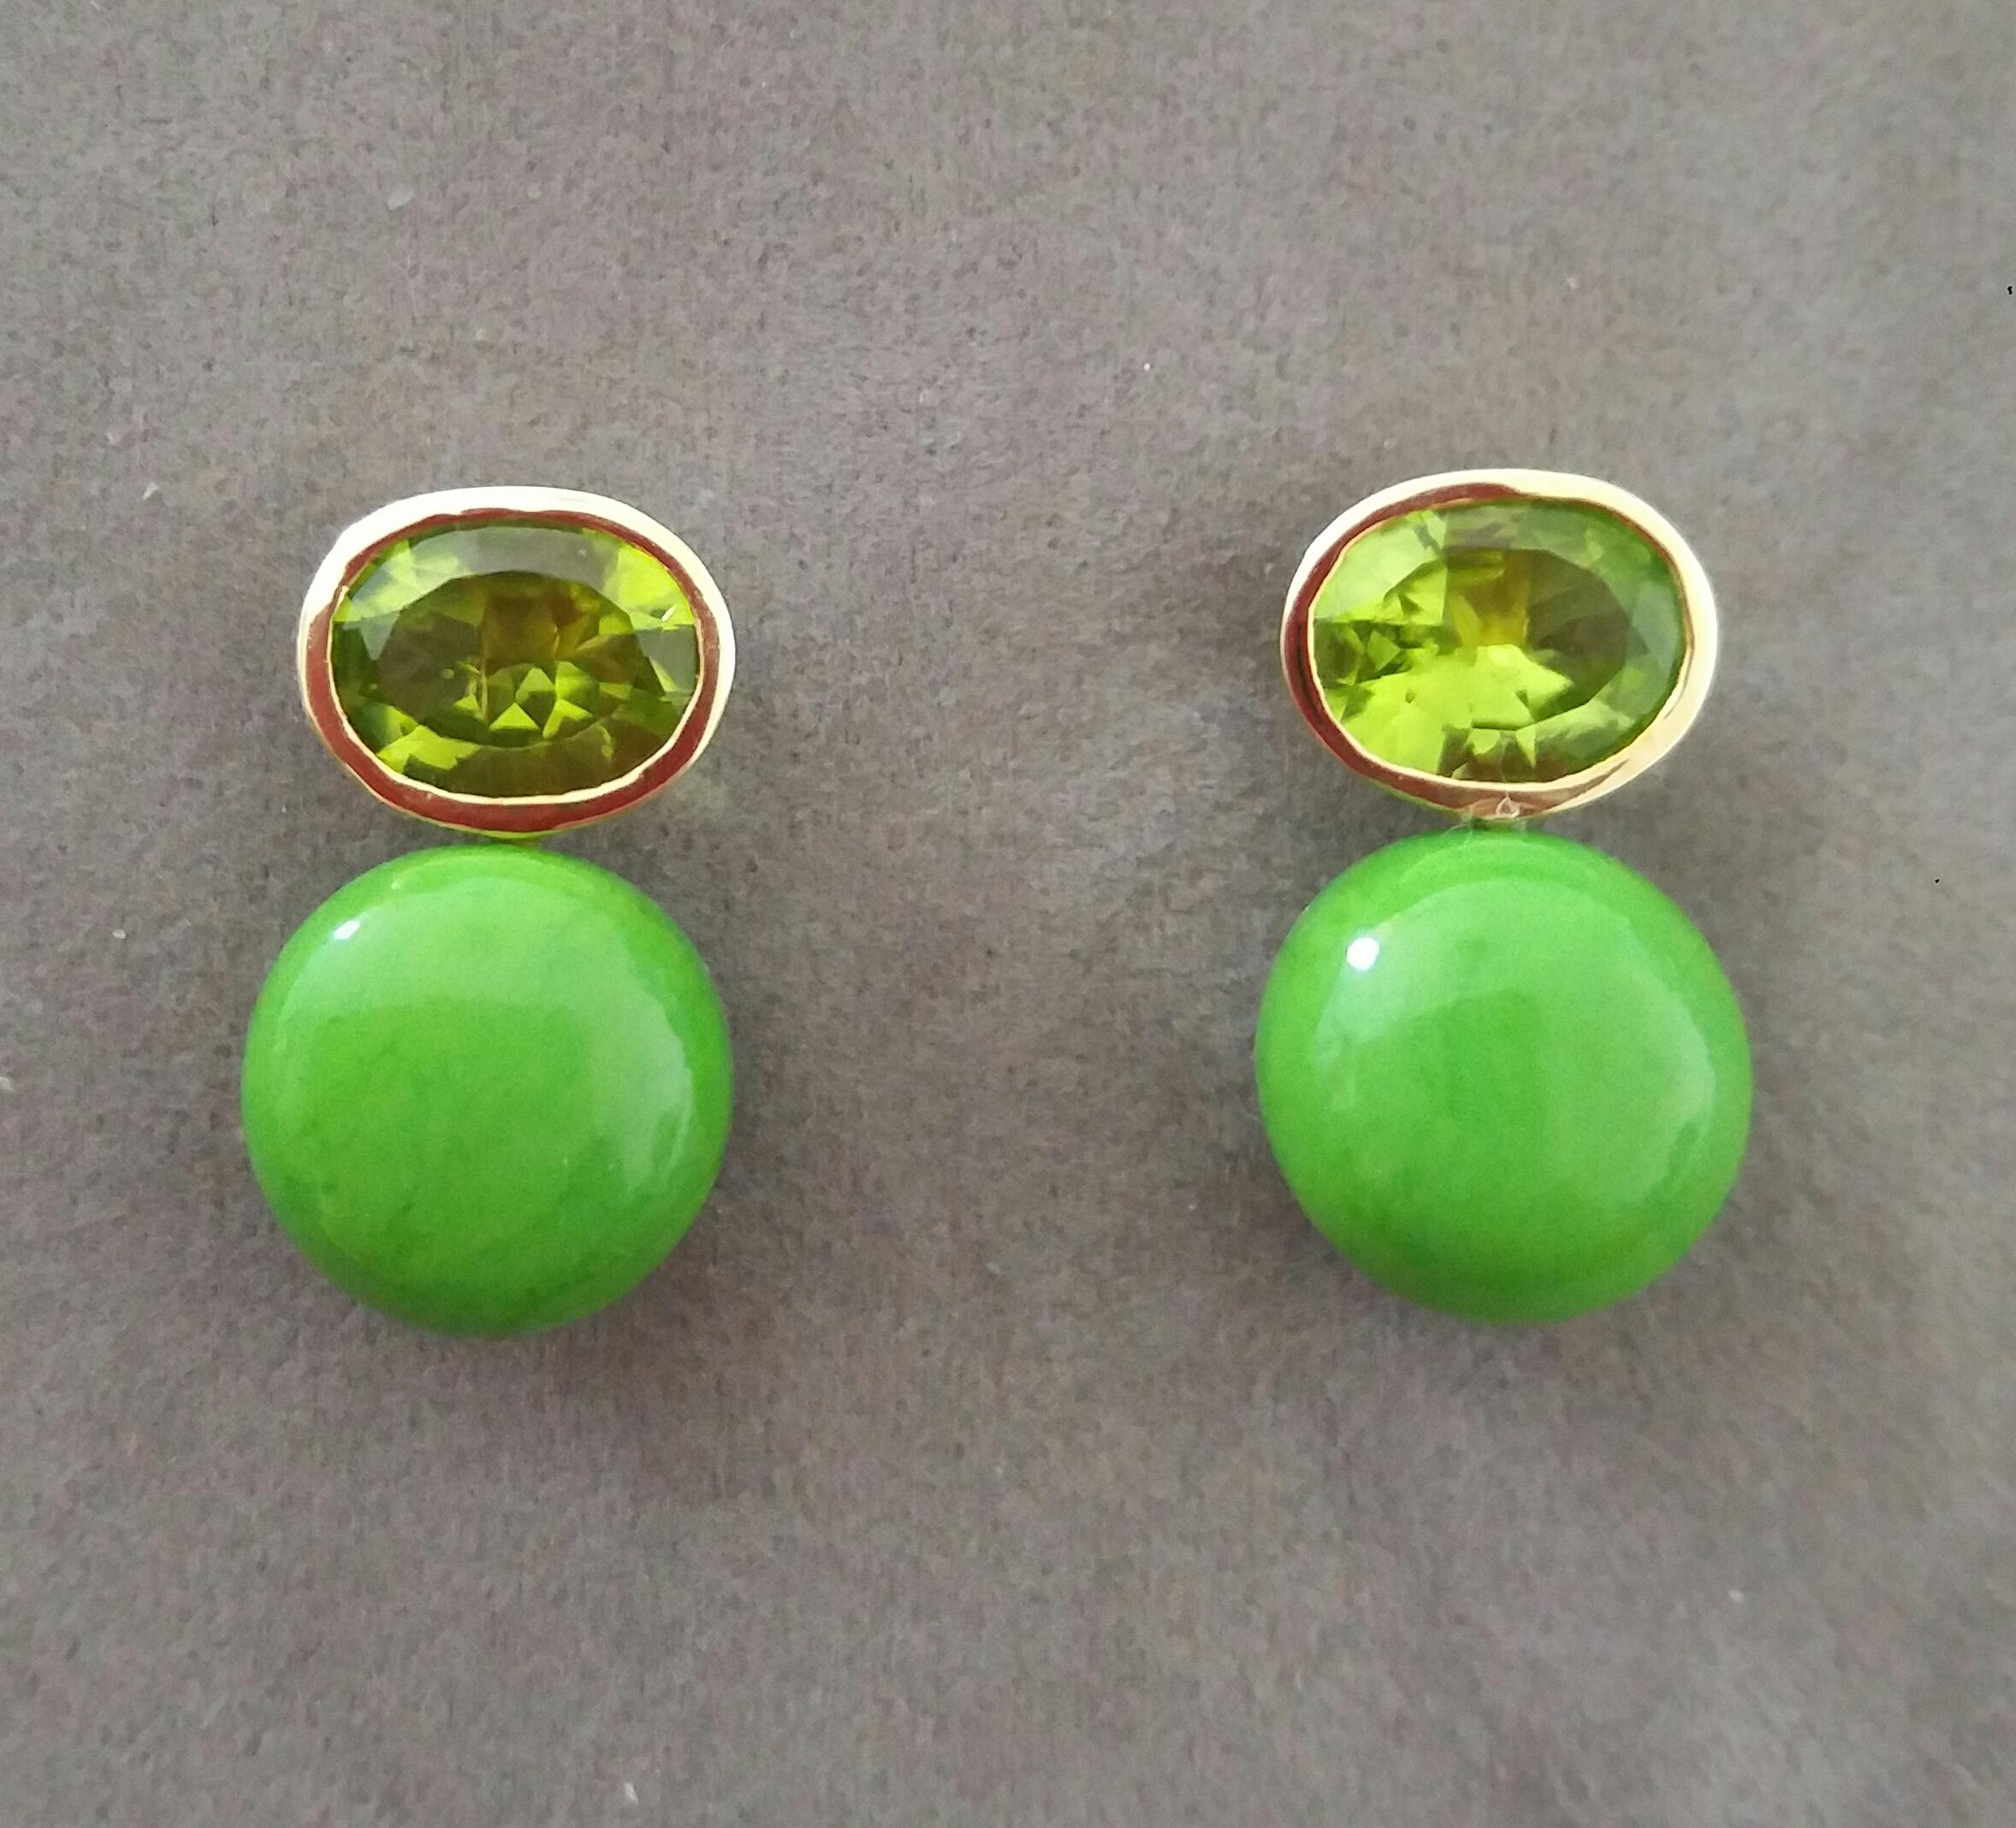 Simple chic stud earrings with a pair of Oval Cut Peridots measuring 8mm x10 mm set in solid 14 Kt. yellow gold on the top and in the lower parts 2 Turkmenistan Green Turquoise round buttons of 12 mm in diameter.

In 1978 our workshop started in